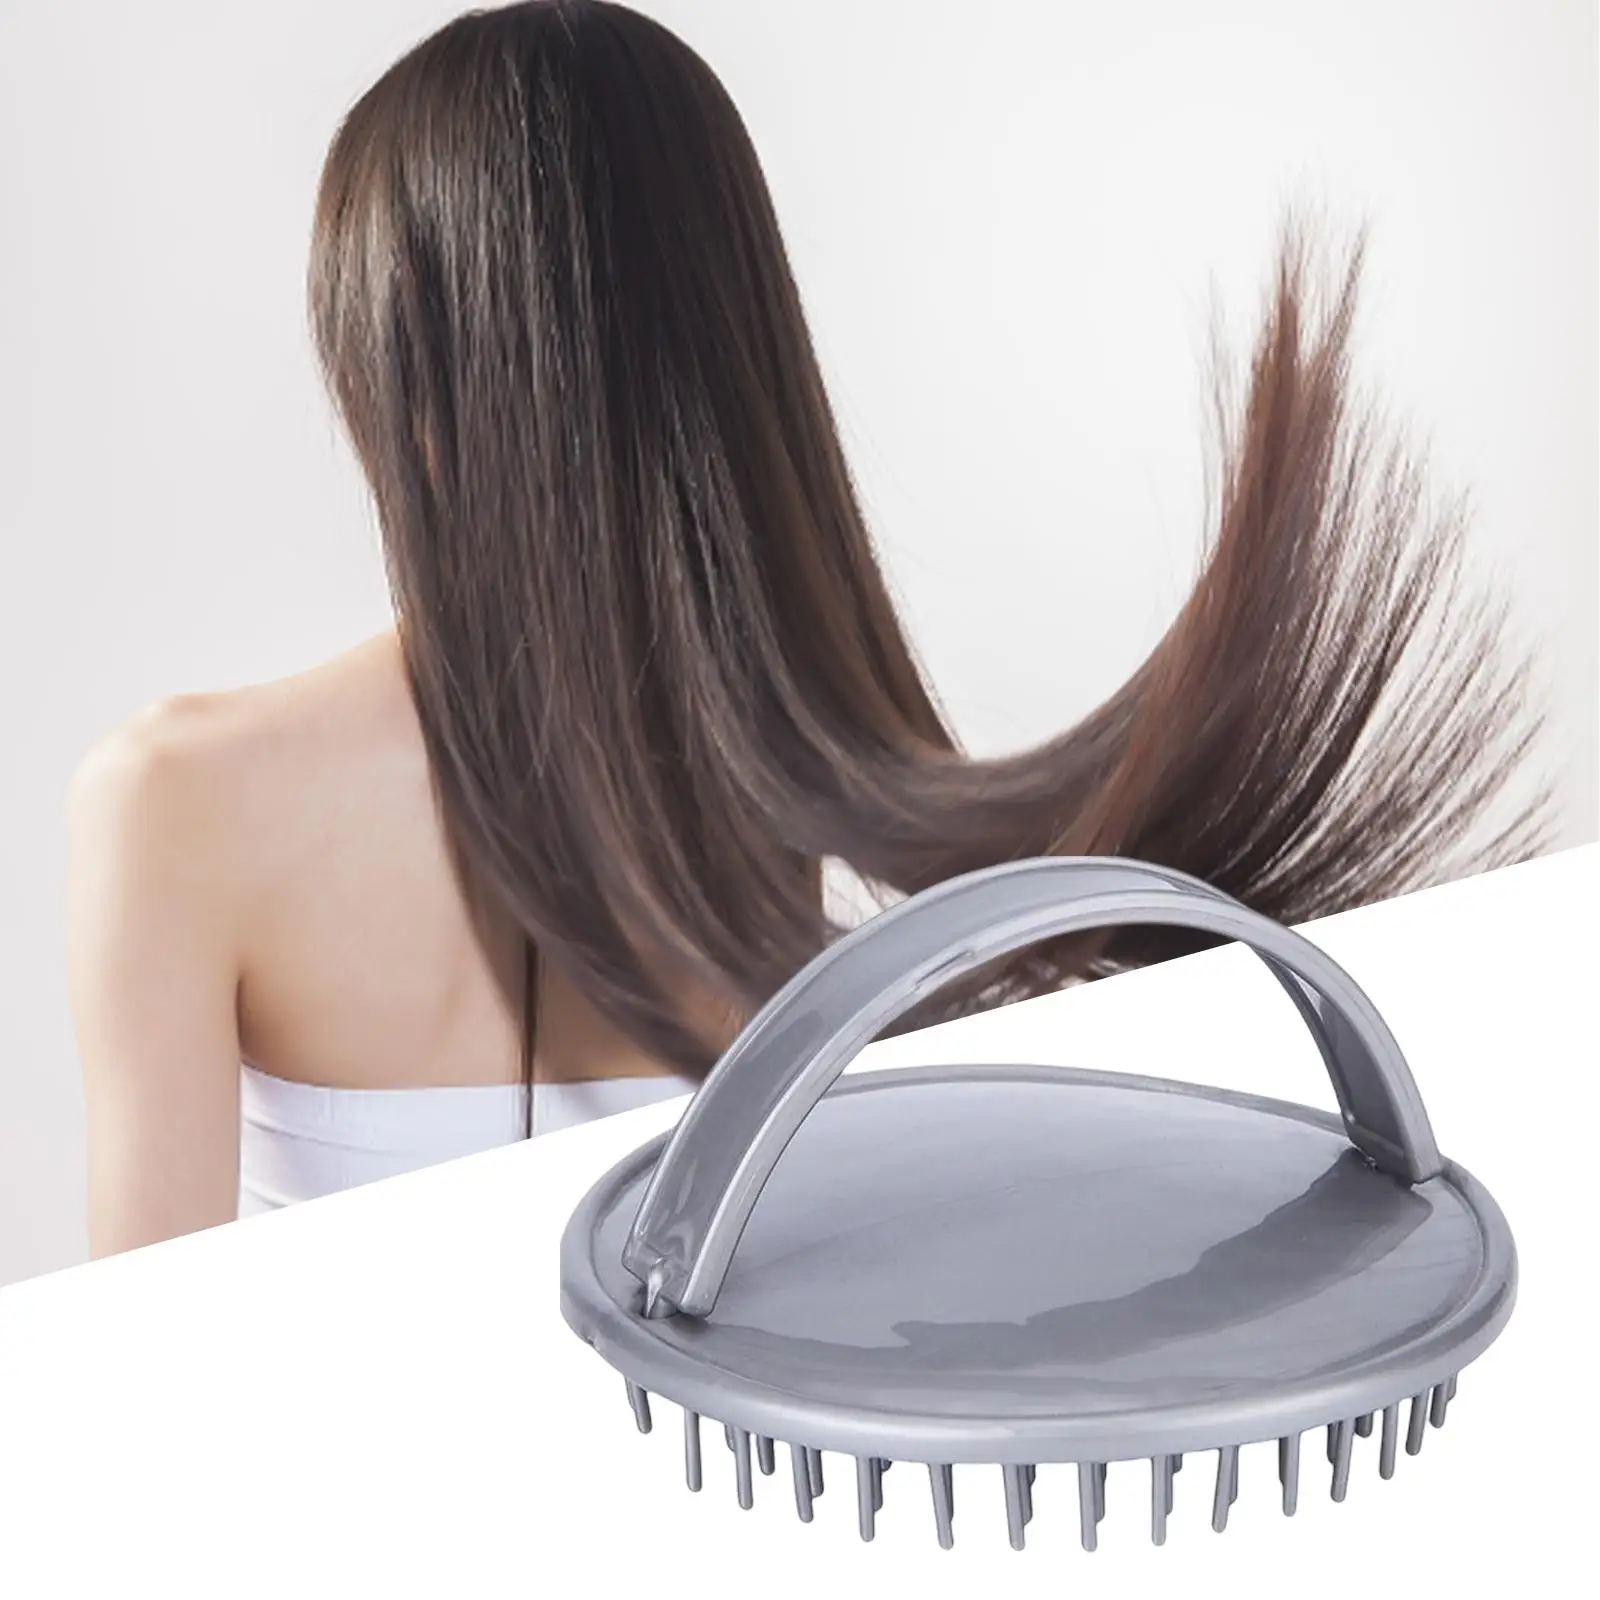 Hair Scalp Massager Shampoo Brush Portable Massage Scalp Drop Resistant Disentangling for Pets Adults Hair Growth Wet Dry Hair